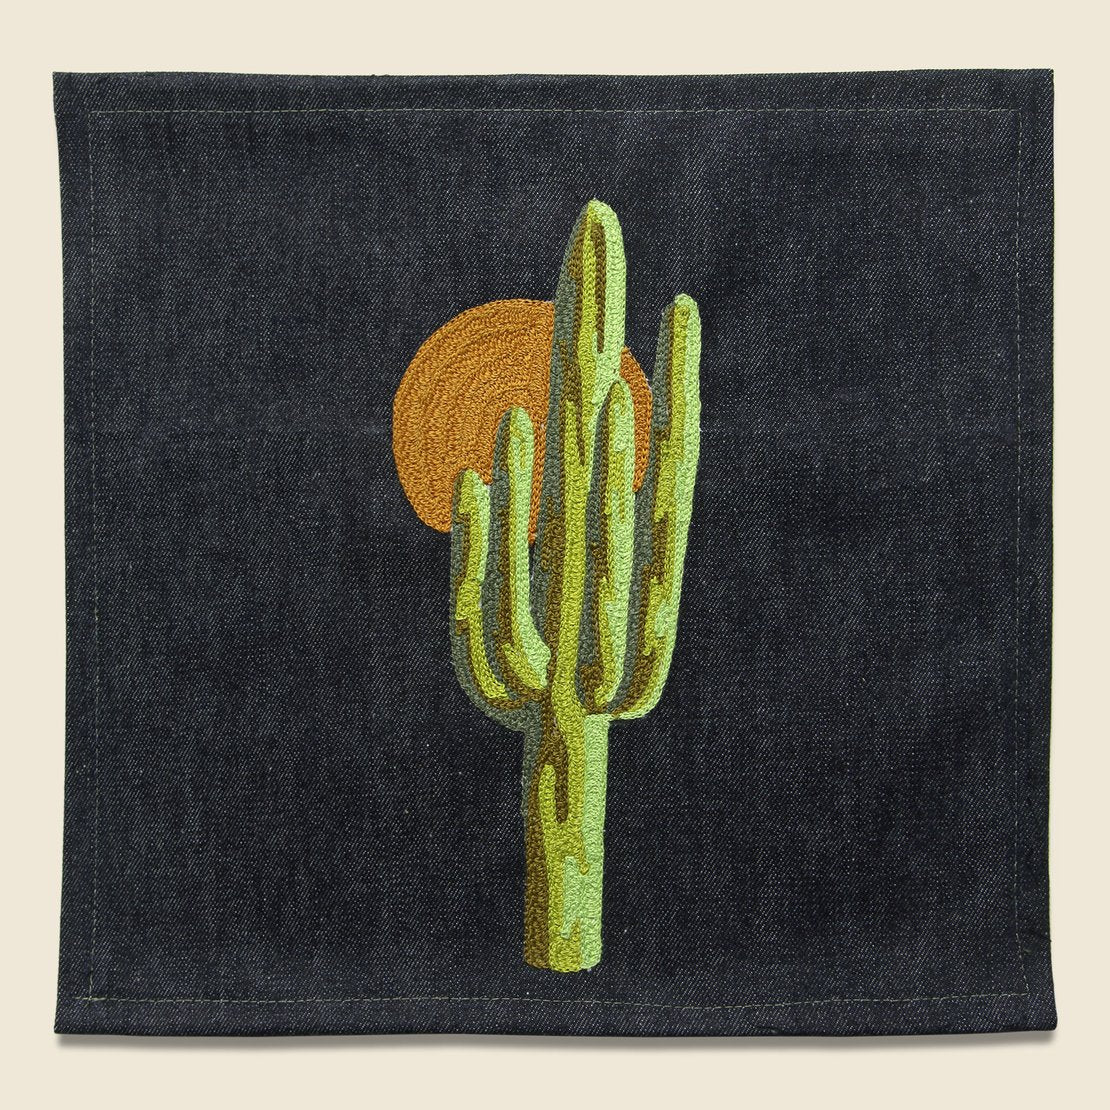 Fort Lonesome Large Direct Stitch Embroidery - Sunset Saguaro Cactus